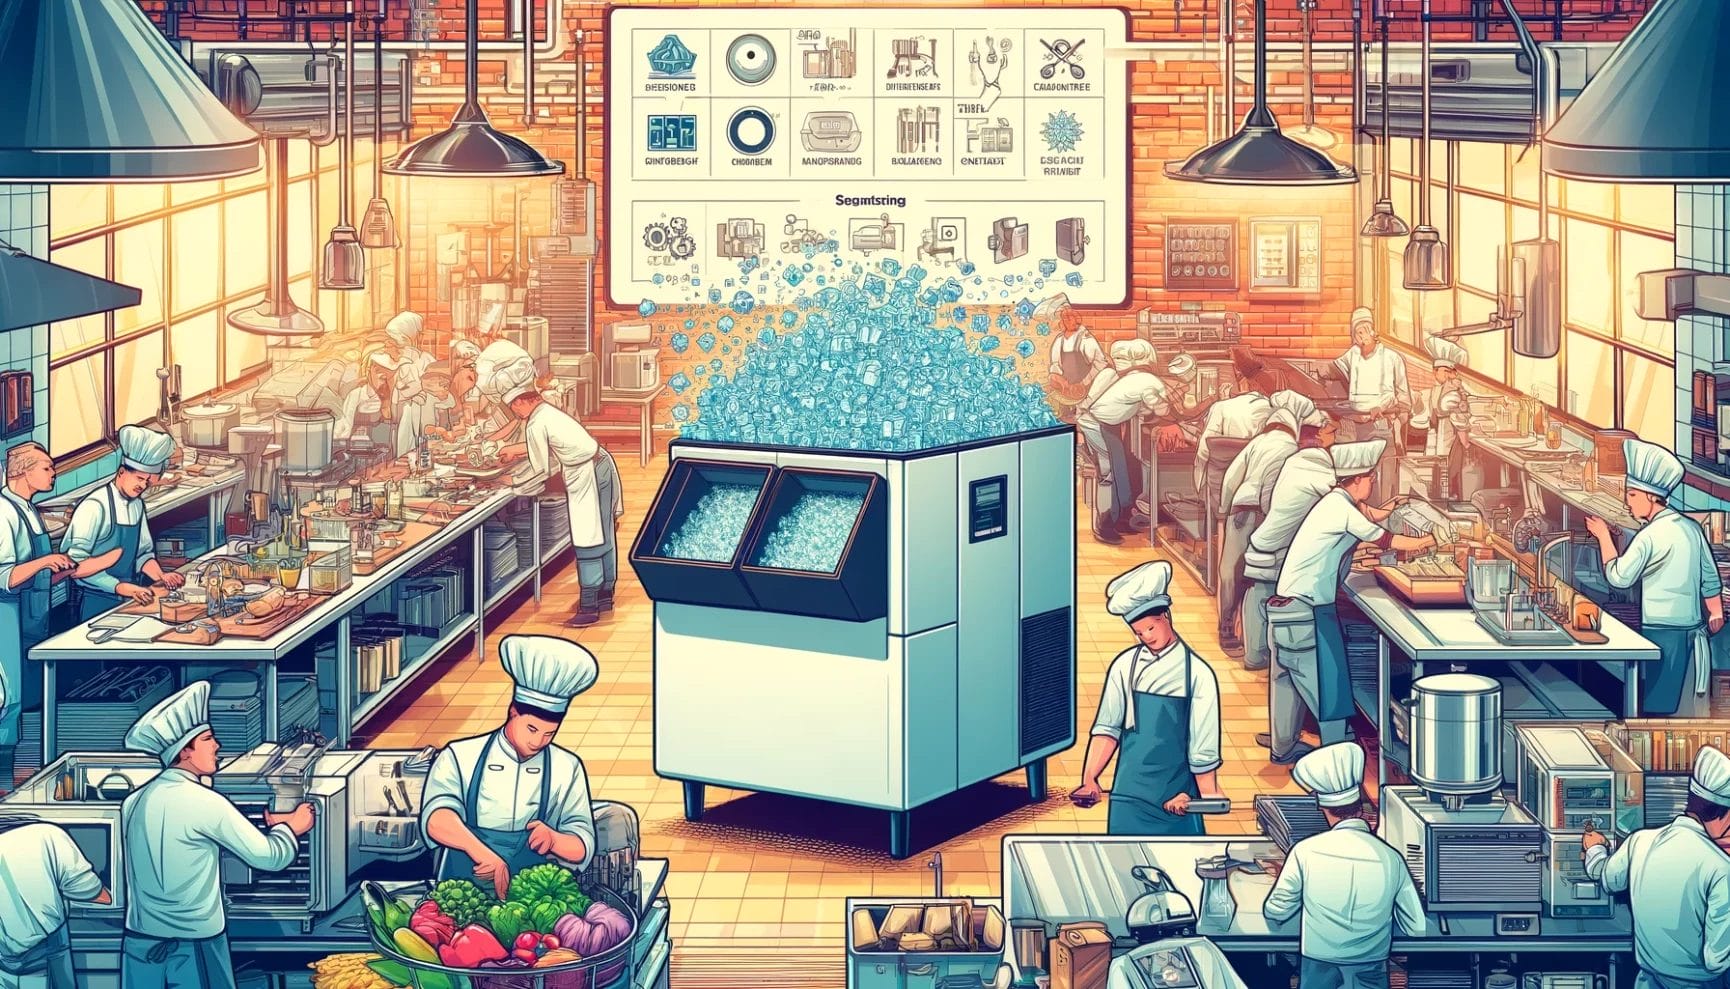 A bustling restaurant kitchen filled with busy chefs and a large, futuristic cooking device with a transparent, bubbling top in the center.